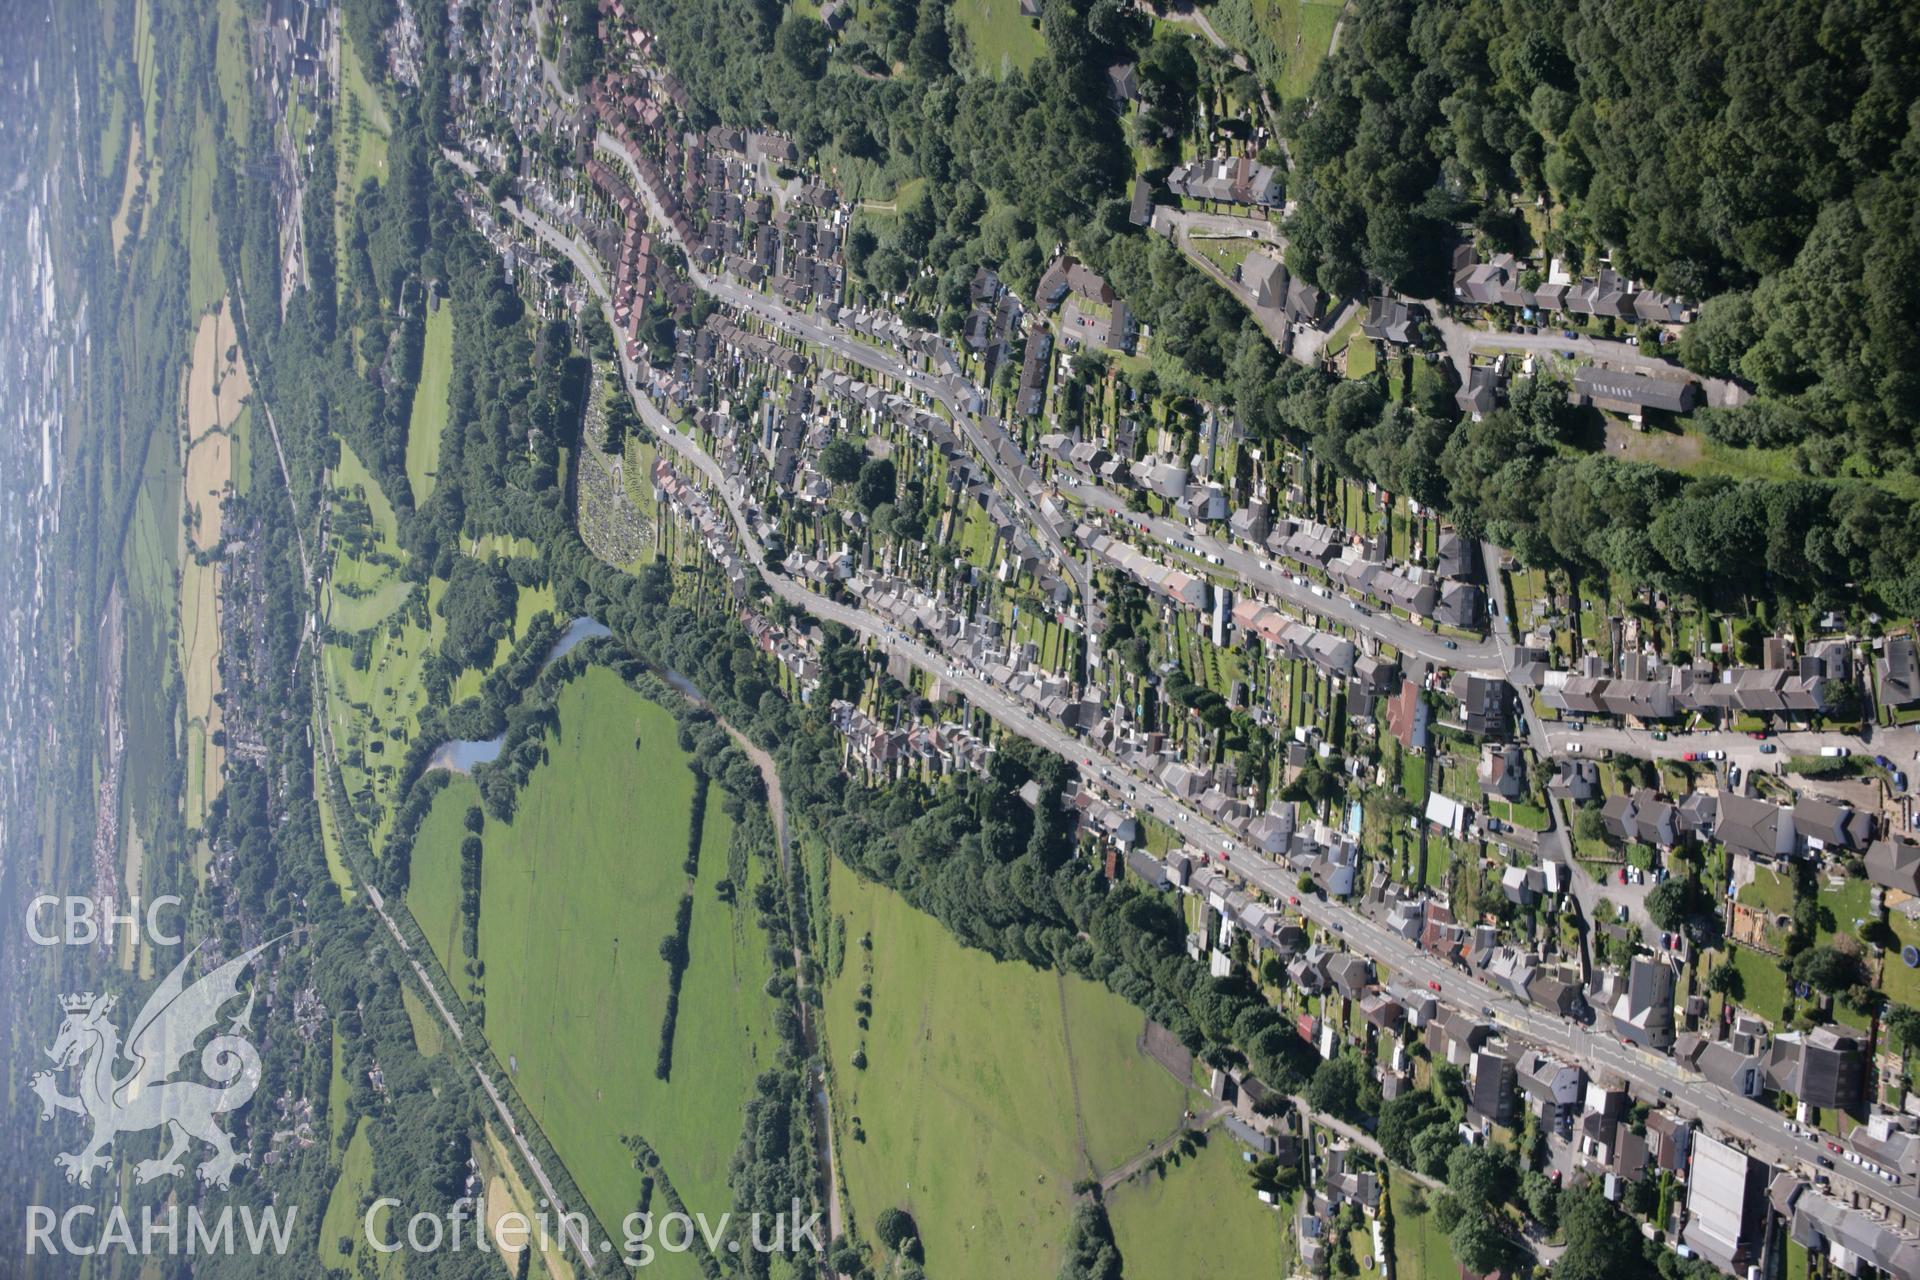 RCAHMW colour oblique aerial photograph of Swansea Canal at Trebanos looking south-east. Taken on 22 June 2005 by Toby Driver